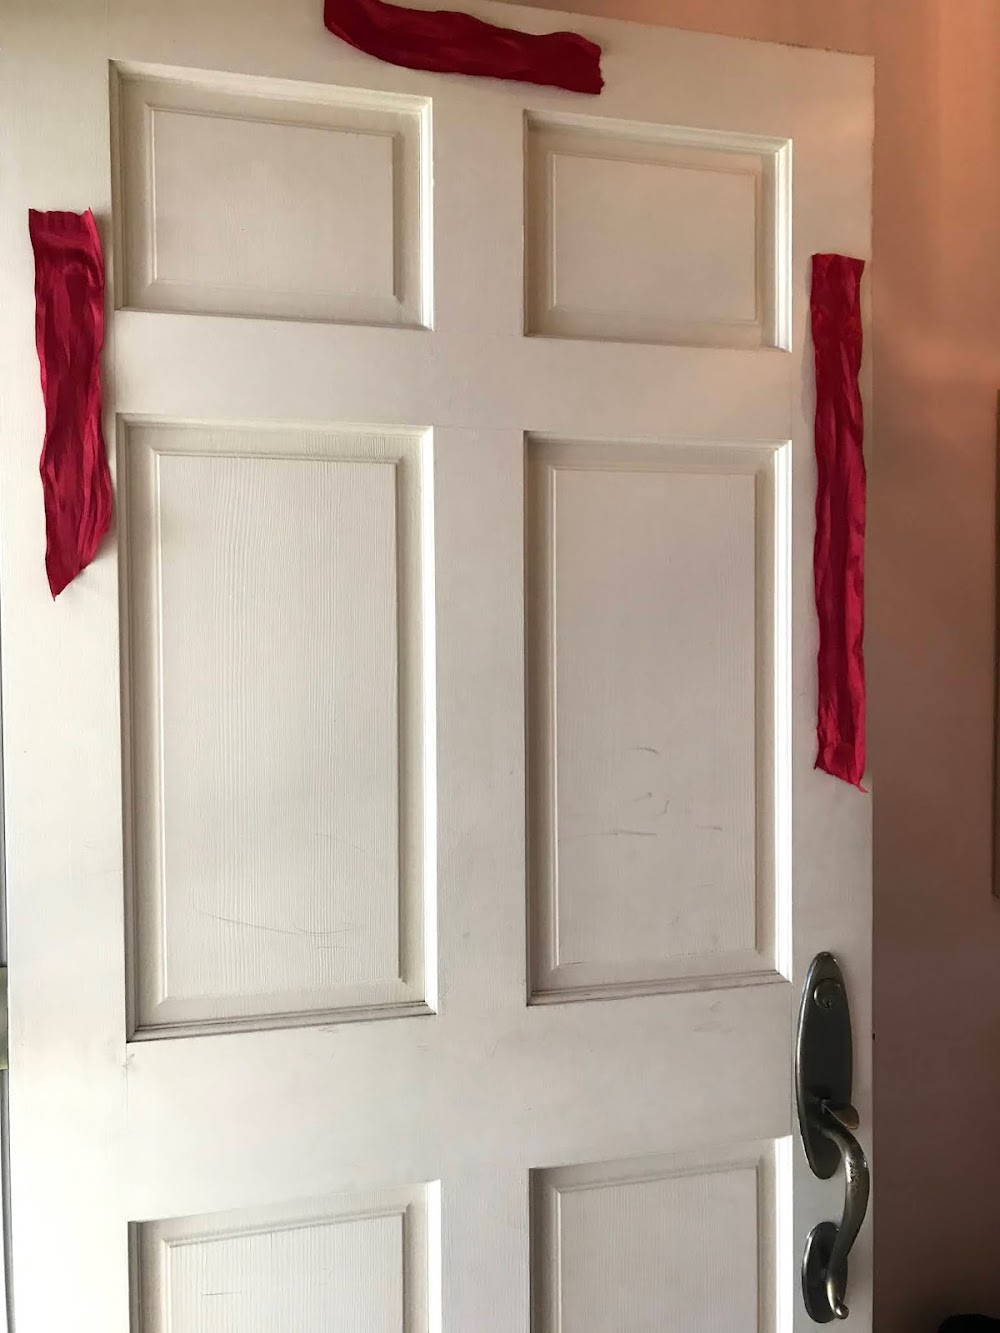 Red Door Movement For Passover